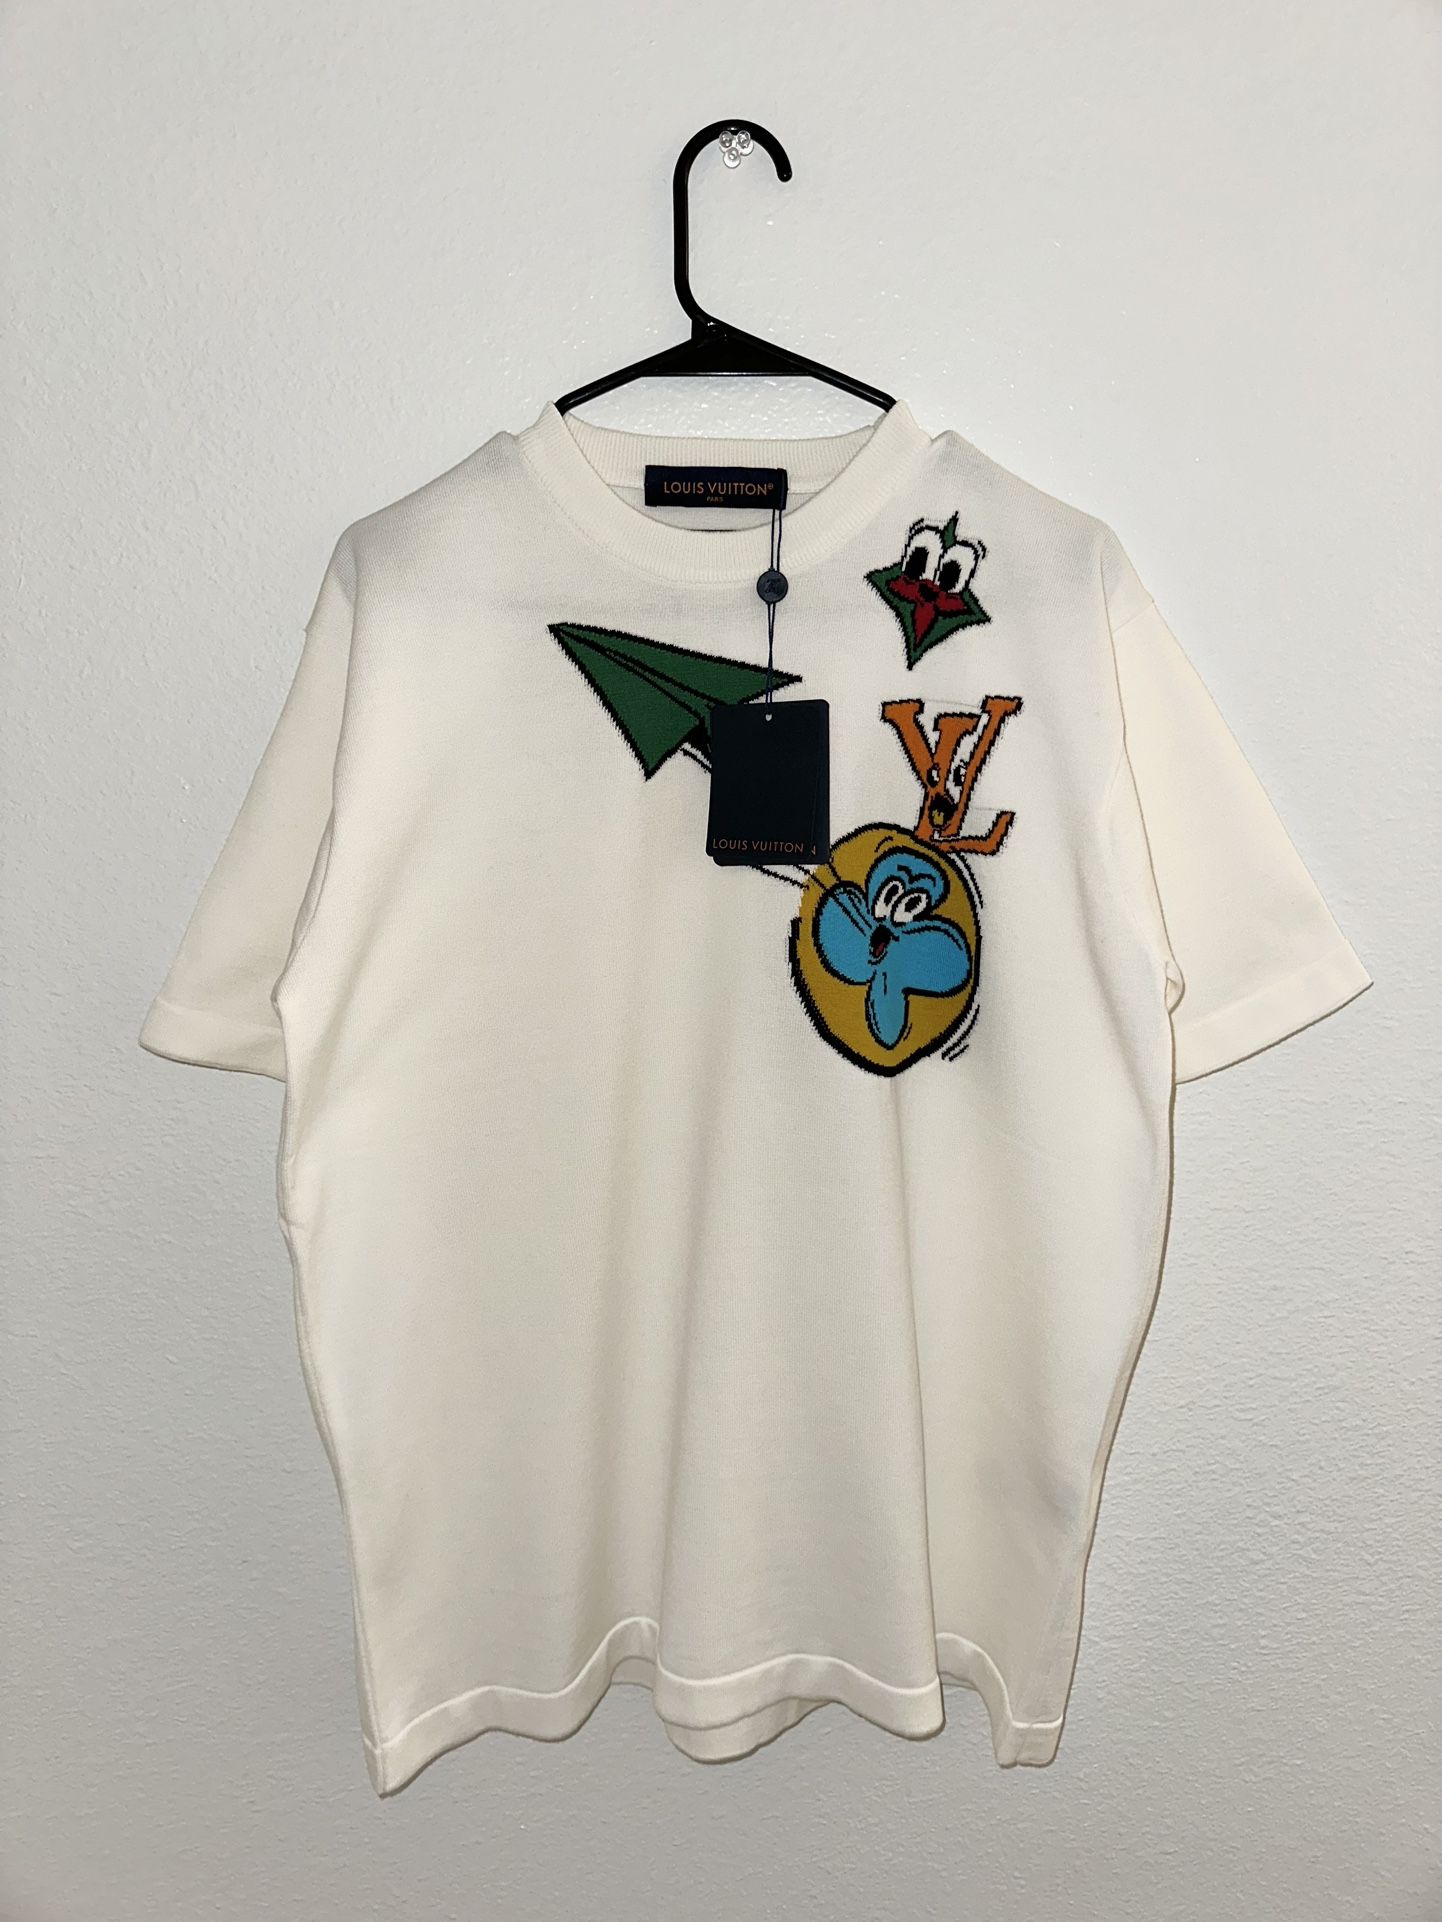 Men's Louis Vuitton Comic Intarsia T-Shirt Size Large for Sale in